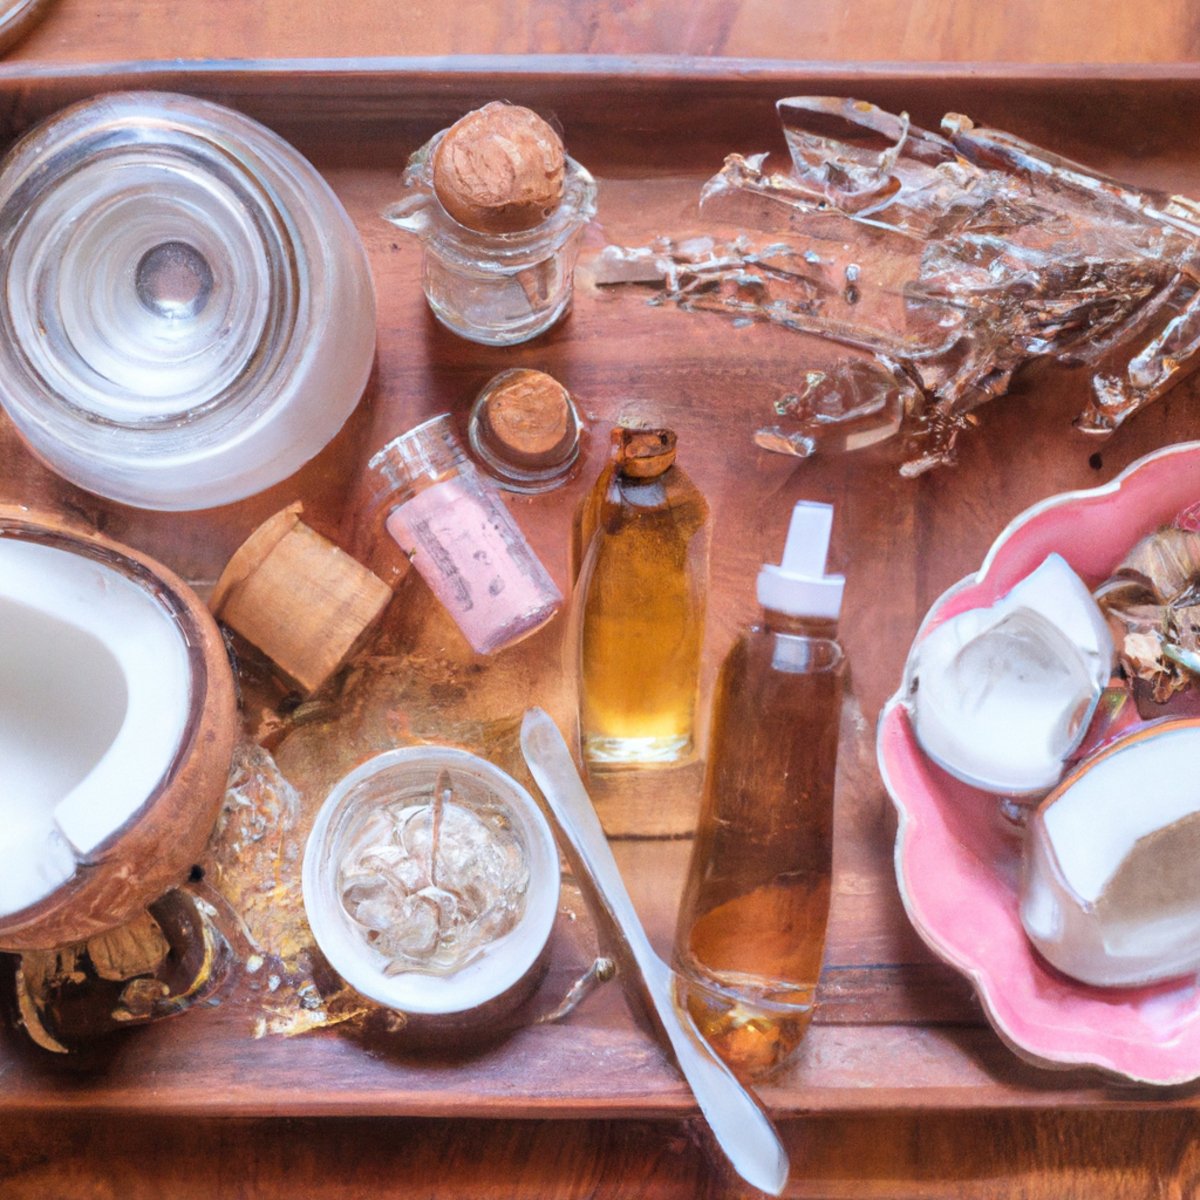 Indulge in a little self-care with these natural skin care routines that will leave you feeling as radiant as the glow of this beautifully arranged tray of coconut oil, rose water, honey, and lavender.